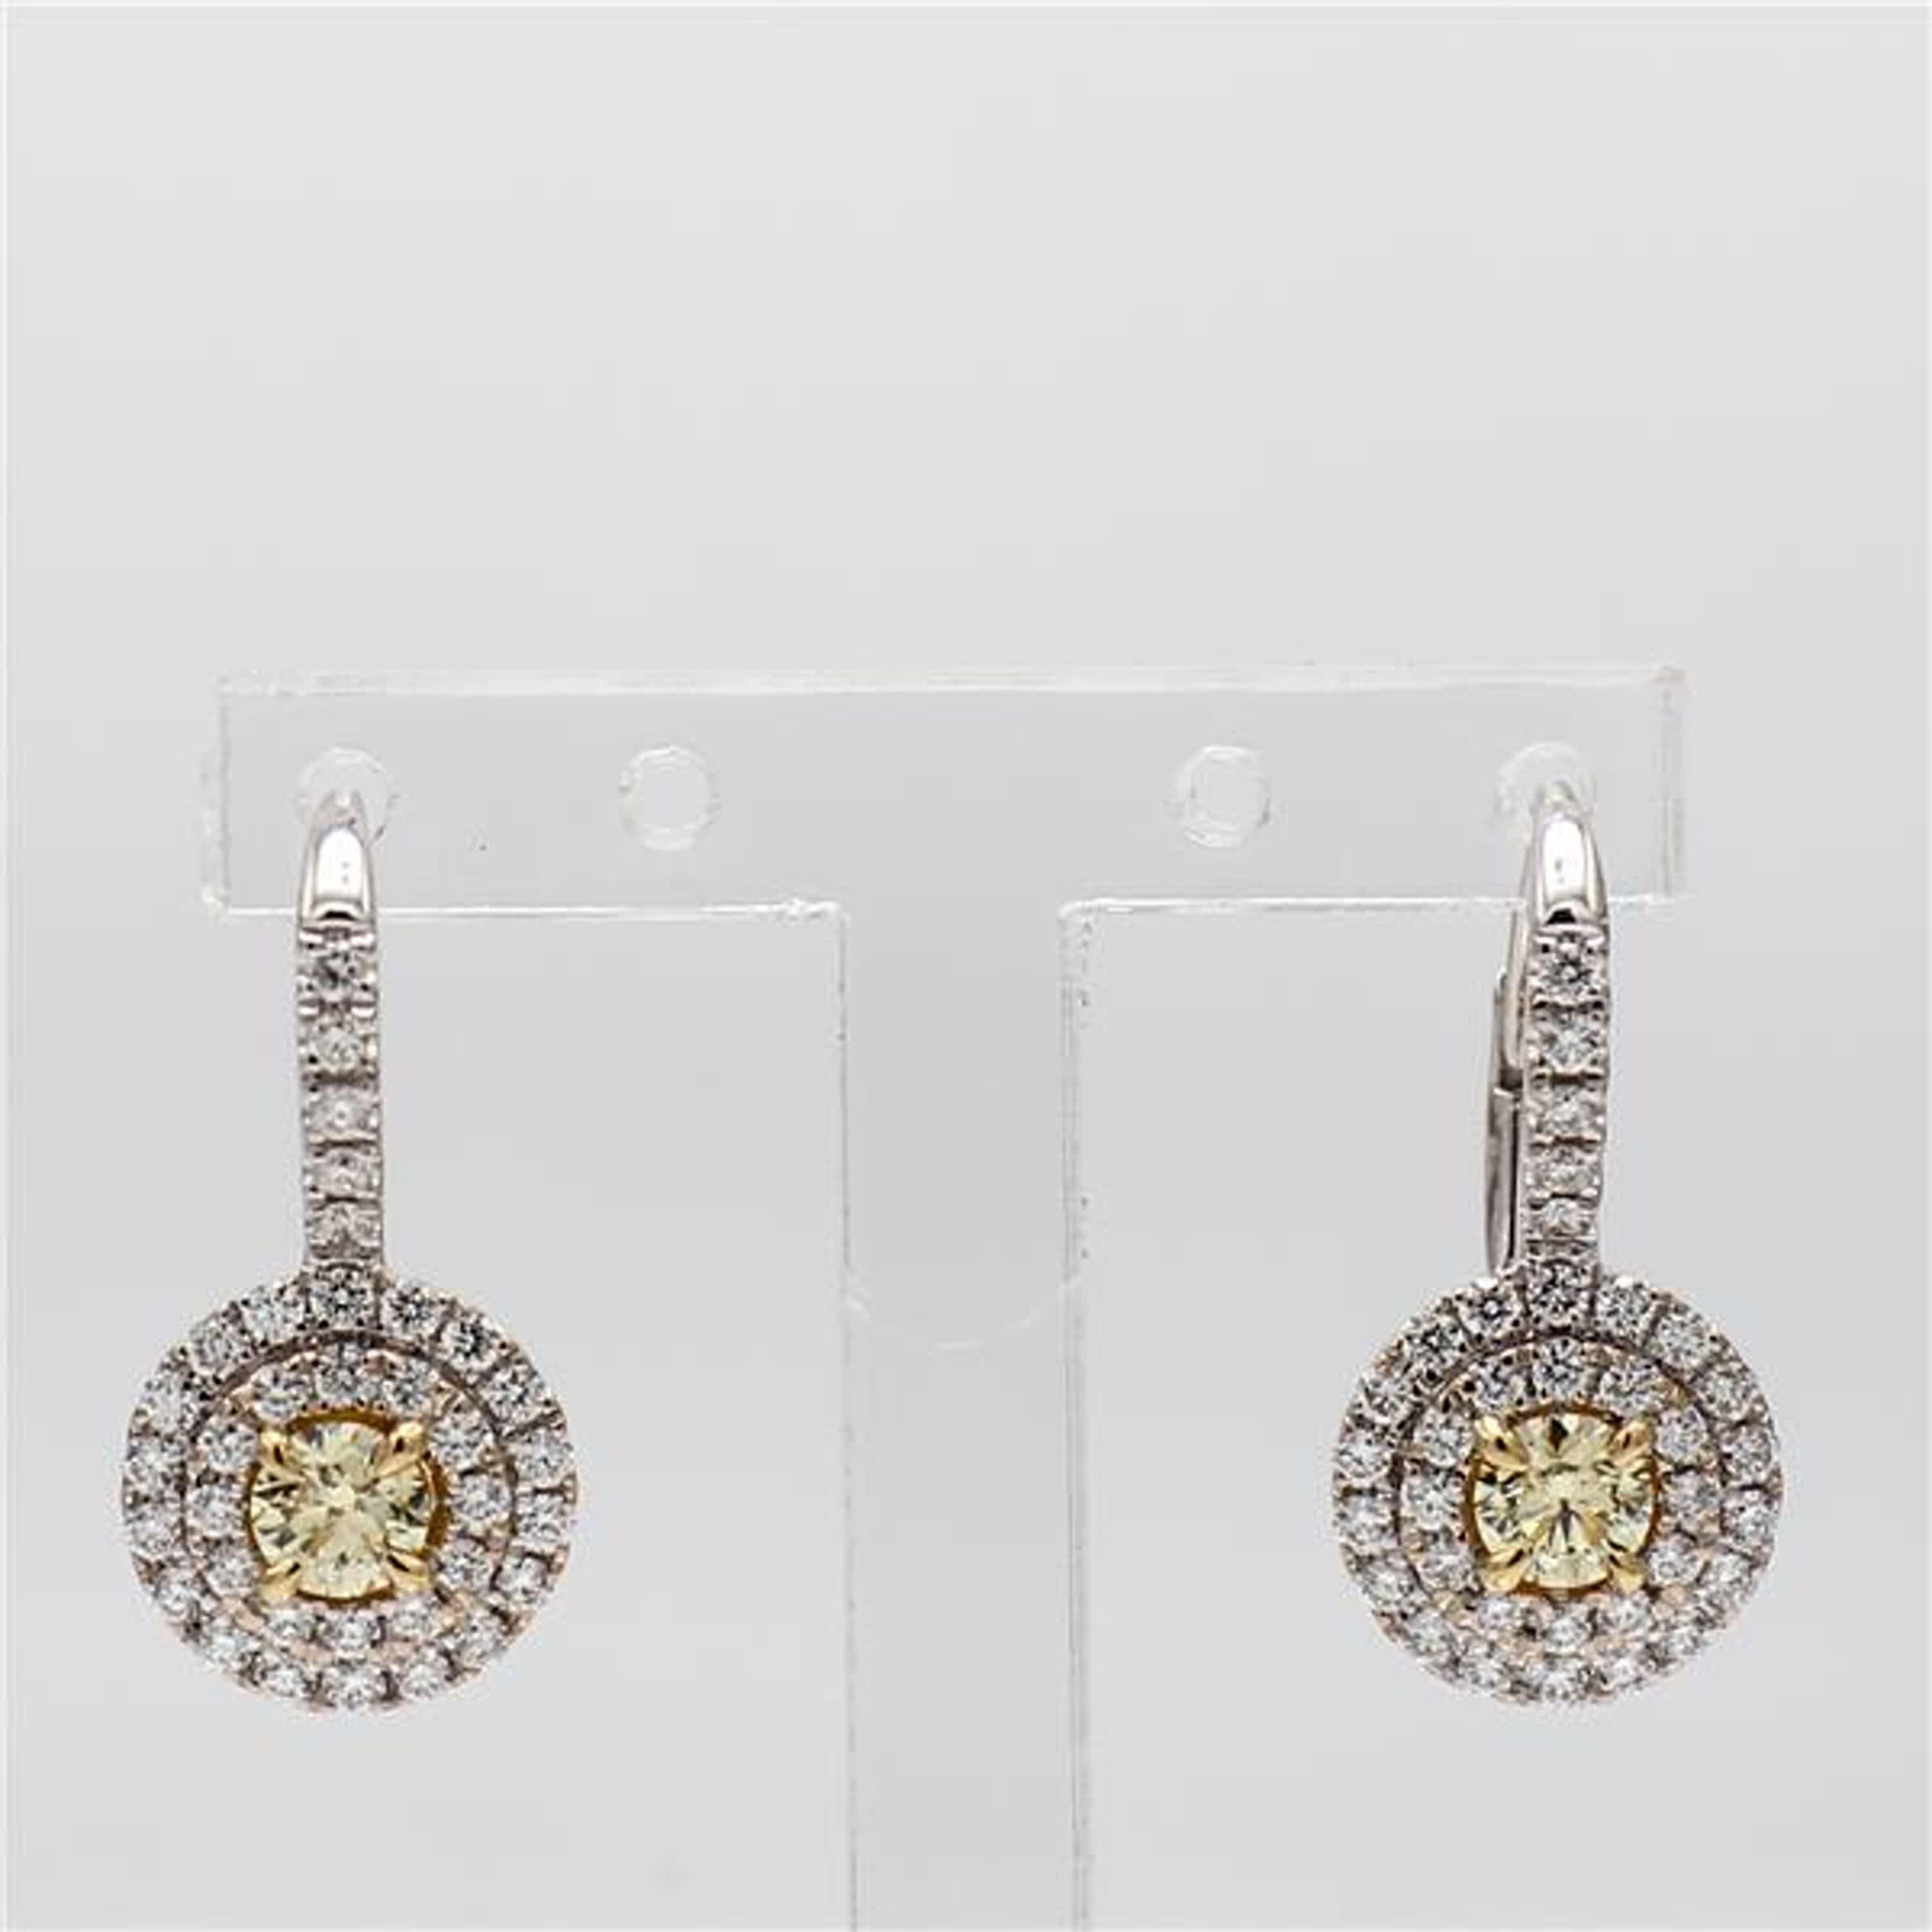 RareGemWorld's classic diamond earrings. Mounted in a beautiful 18K Yellow and White Gold setting with natural round cut yellow diamonds. The yellow diamonds are surrounded by small round natural white diamond melee in a beautiful double halo. These